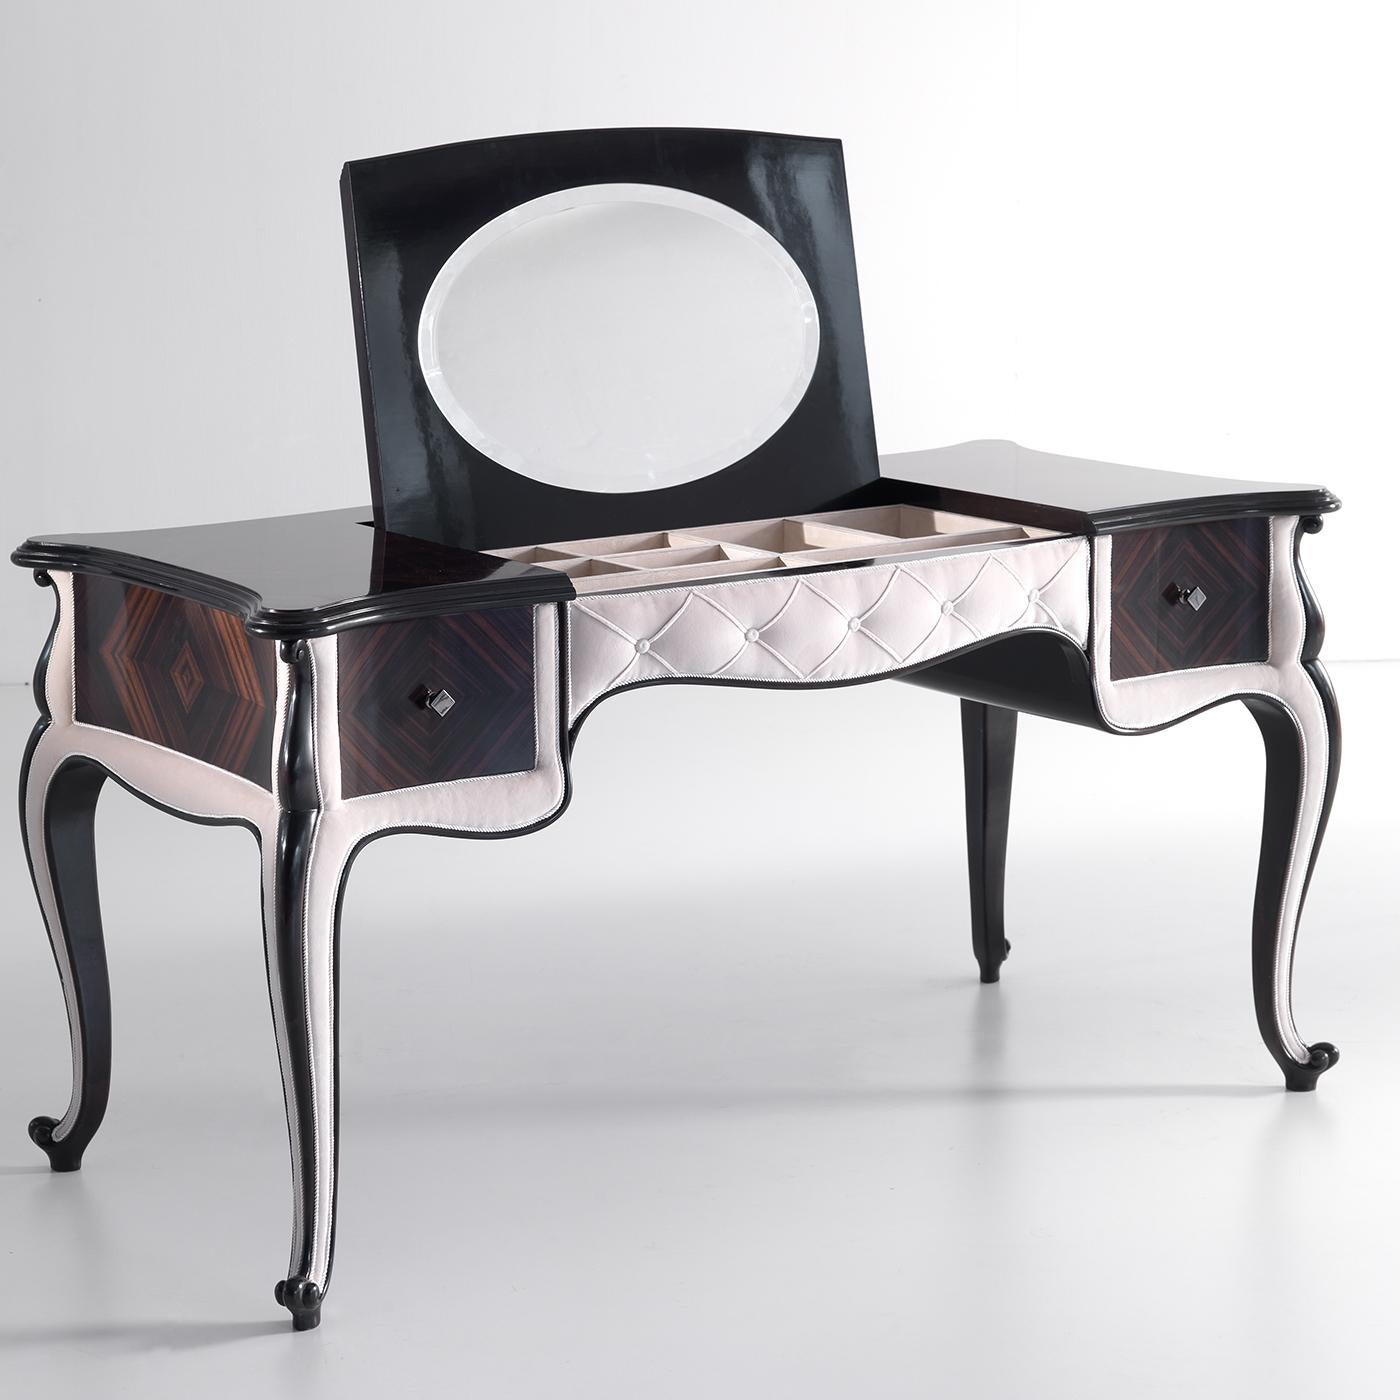 The distinctive and intense veining typical of Makassar ebony are showcased in this exquisite vanity table gracefully resting on four cabriole legs. Precious inserts of light leather extensively adorn the design, including the quilted motif in the